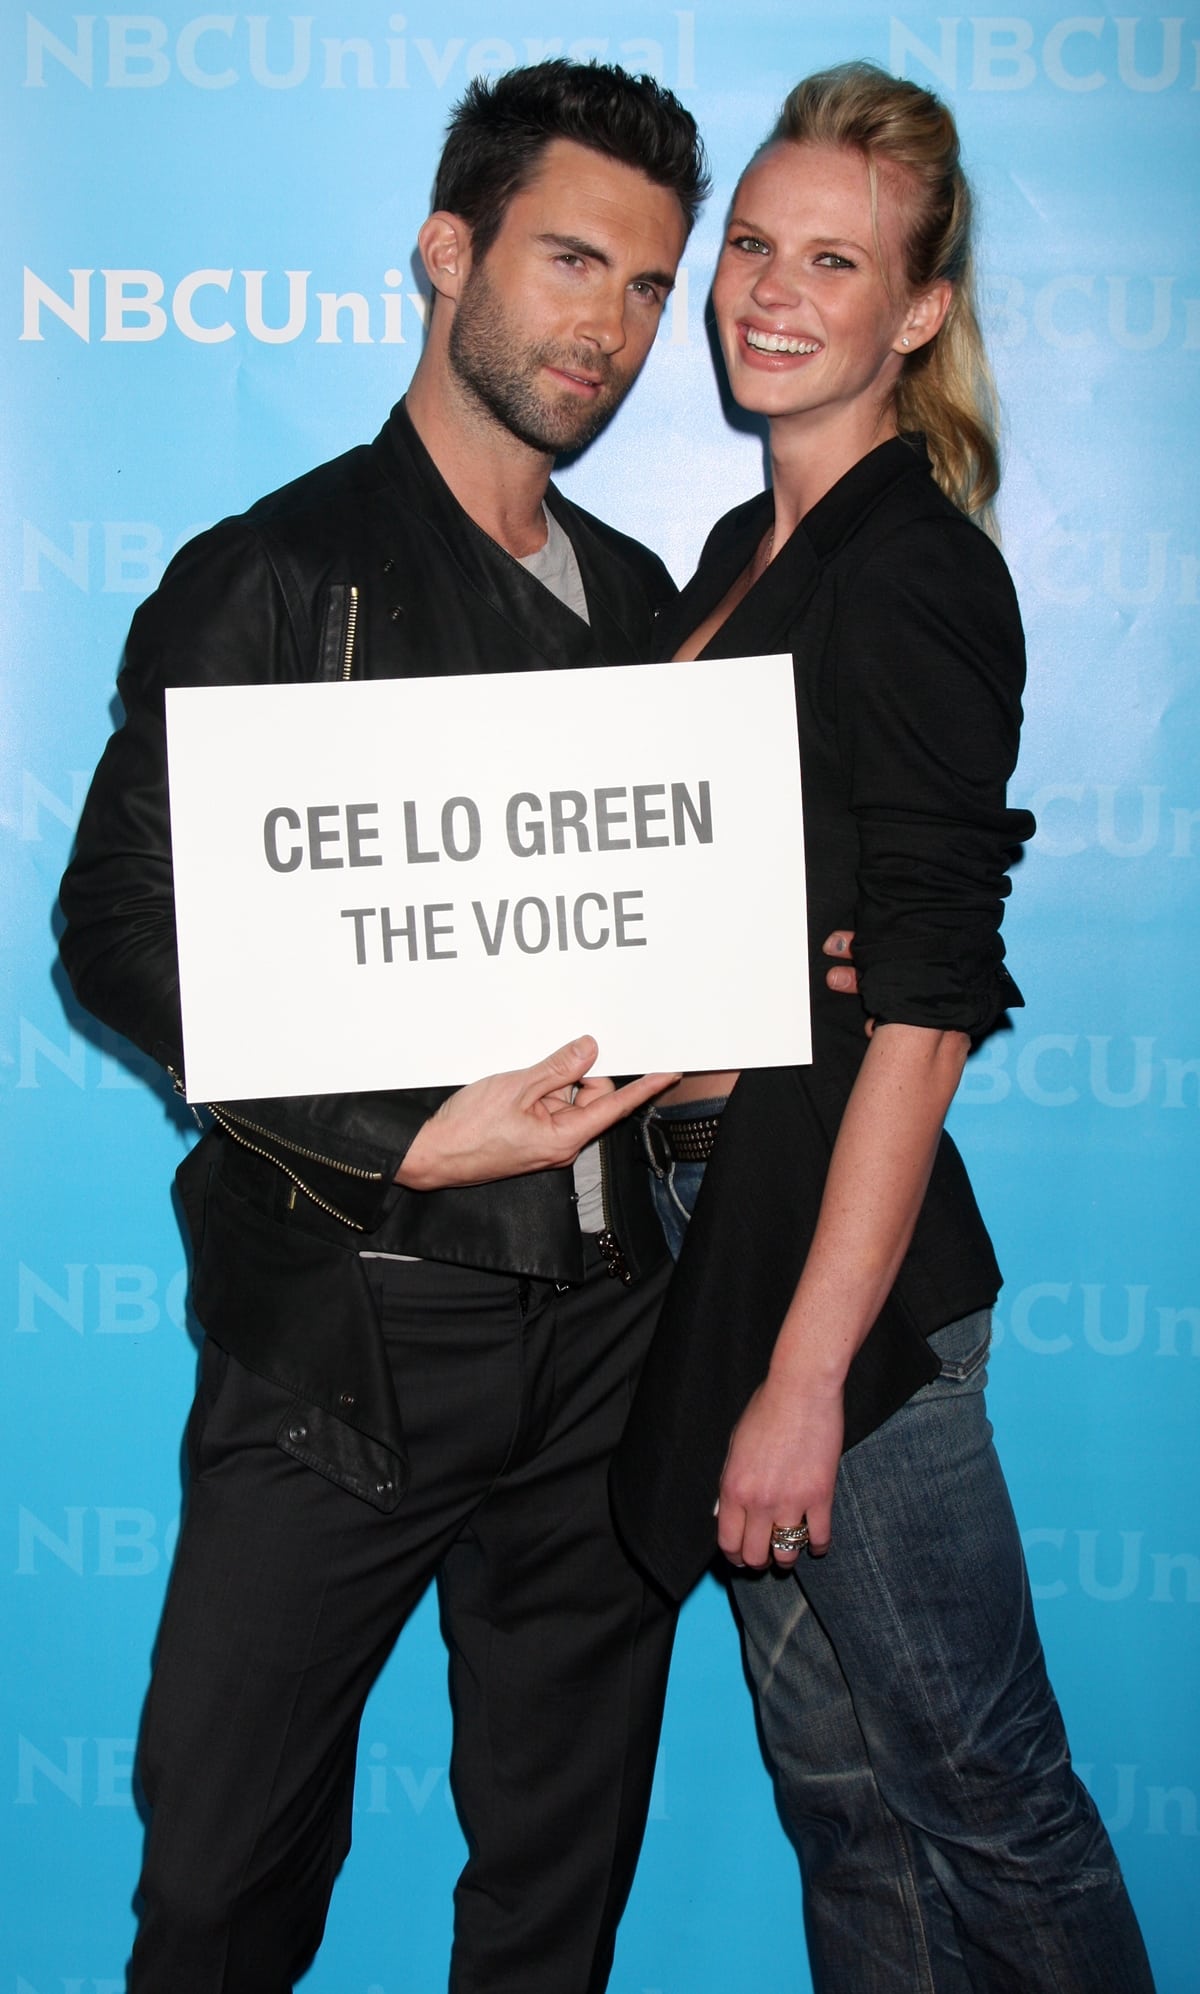 The Russian-born model Anne Vyalitsyna and Adam Levine split in April 2012 after two years of dating